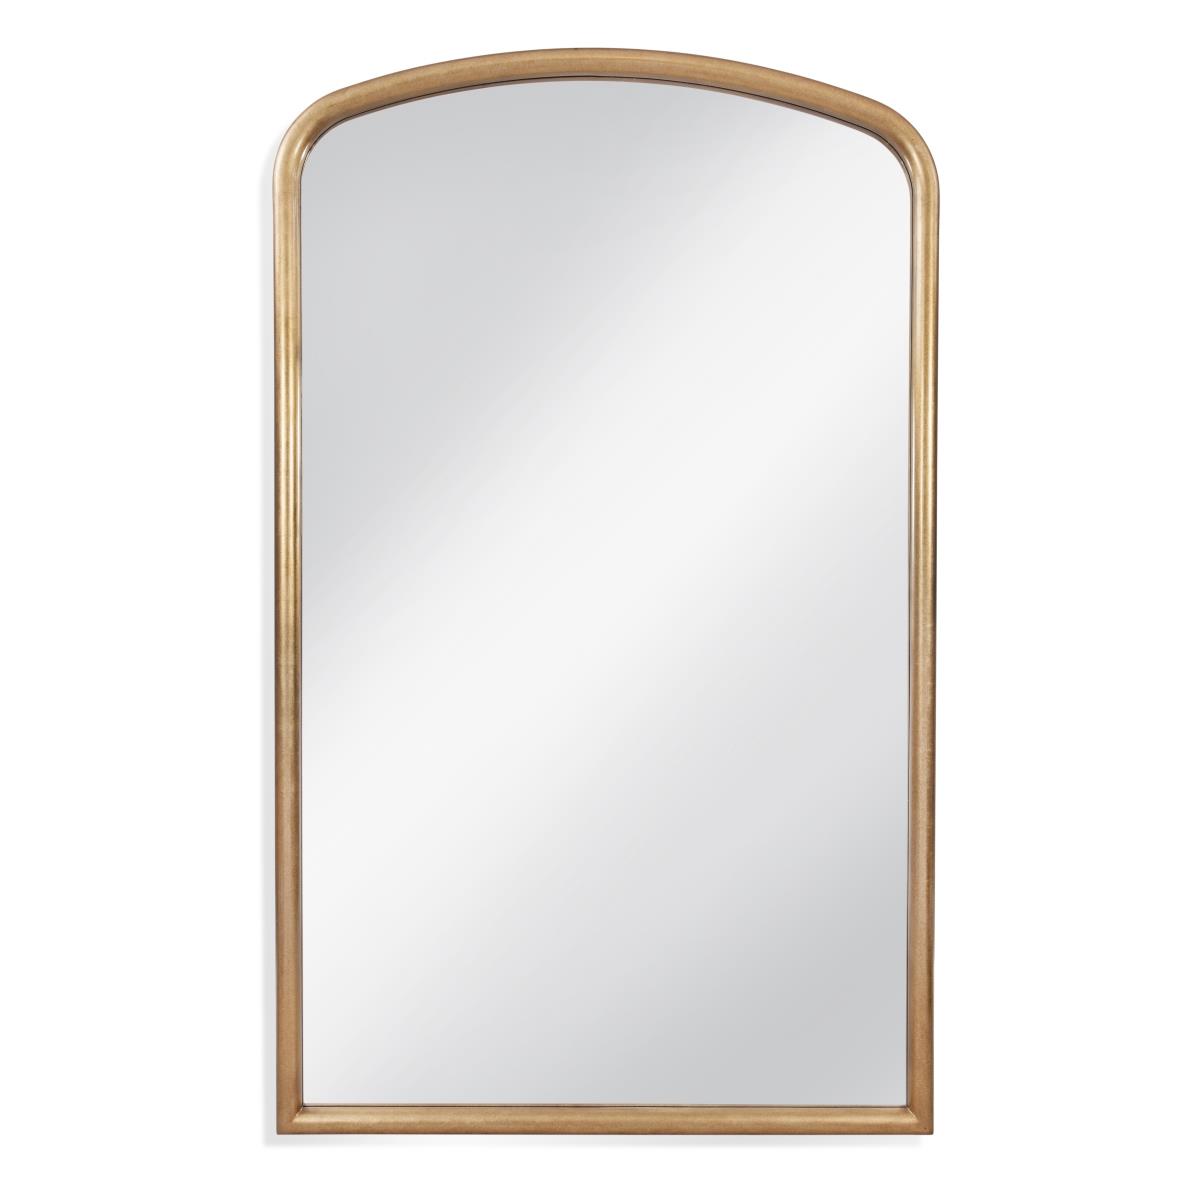 M4218 Brookings Leaner Mirror, Antique Gold Leaf - 52 X 86 In.